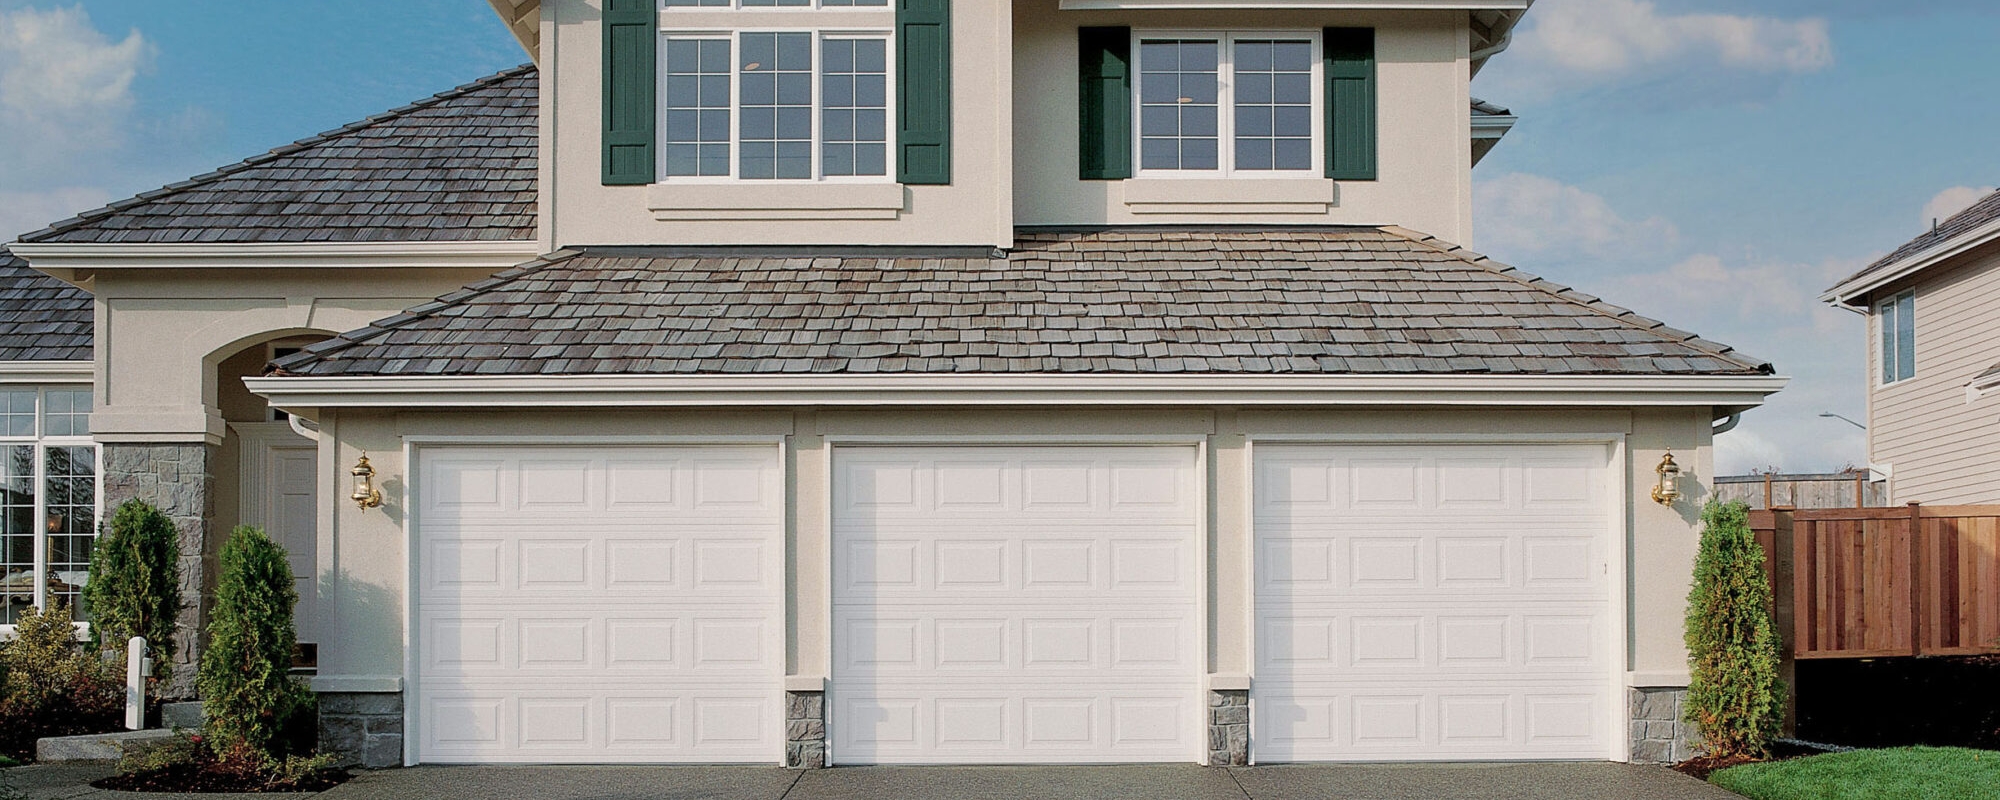 Derkson 9x7 Garage Doors are some of the Best on The Market, Period !